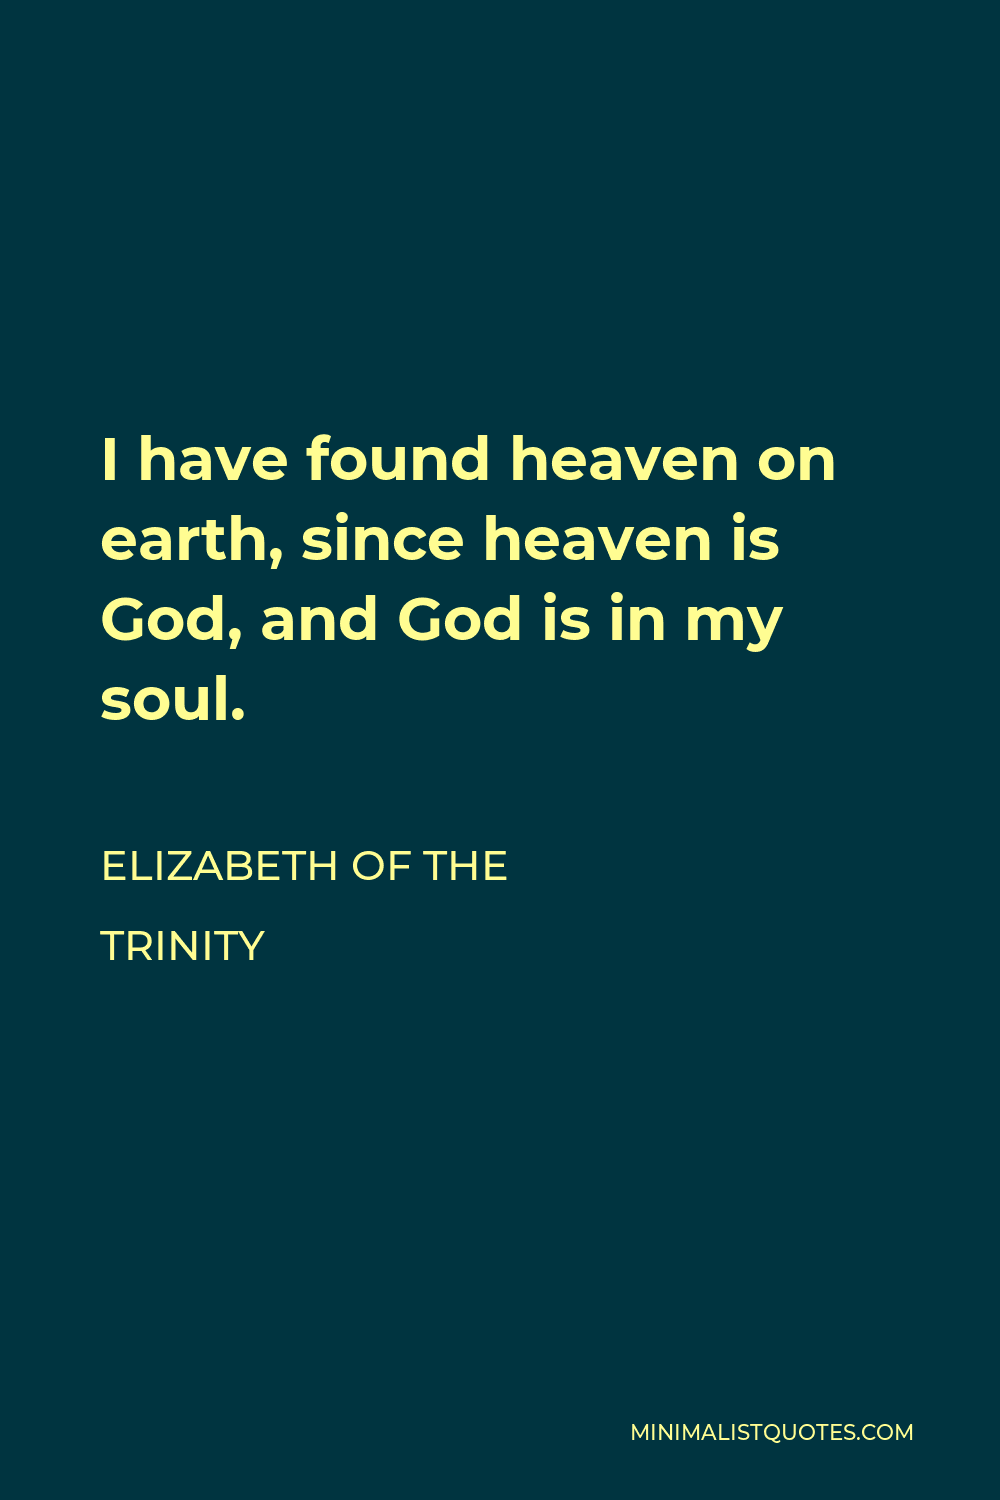 Elizabeth of the Trinity Quote - I have found heaven on earth, since heaven is God, and God is in my soul.